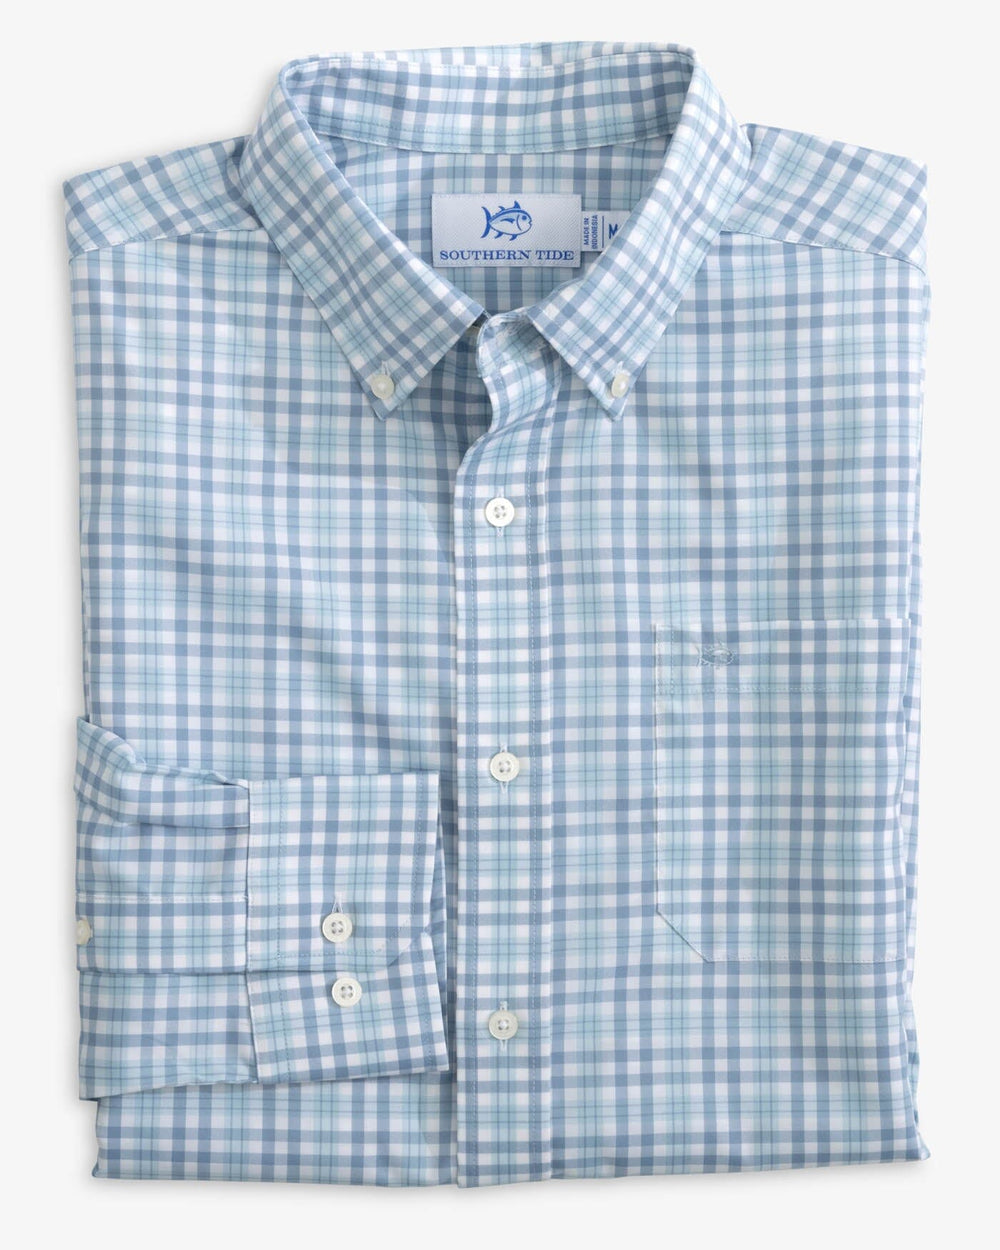 The folded view of the Southern Tide Haywood brrr Plaid Intercoastal Sport Shirts by Southern Tide - Dream Blue